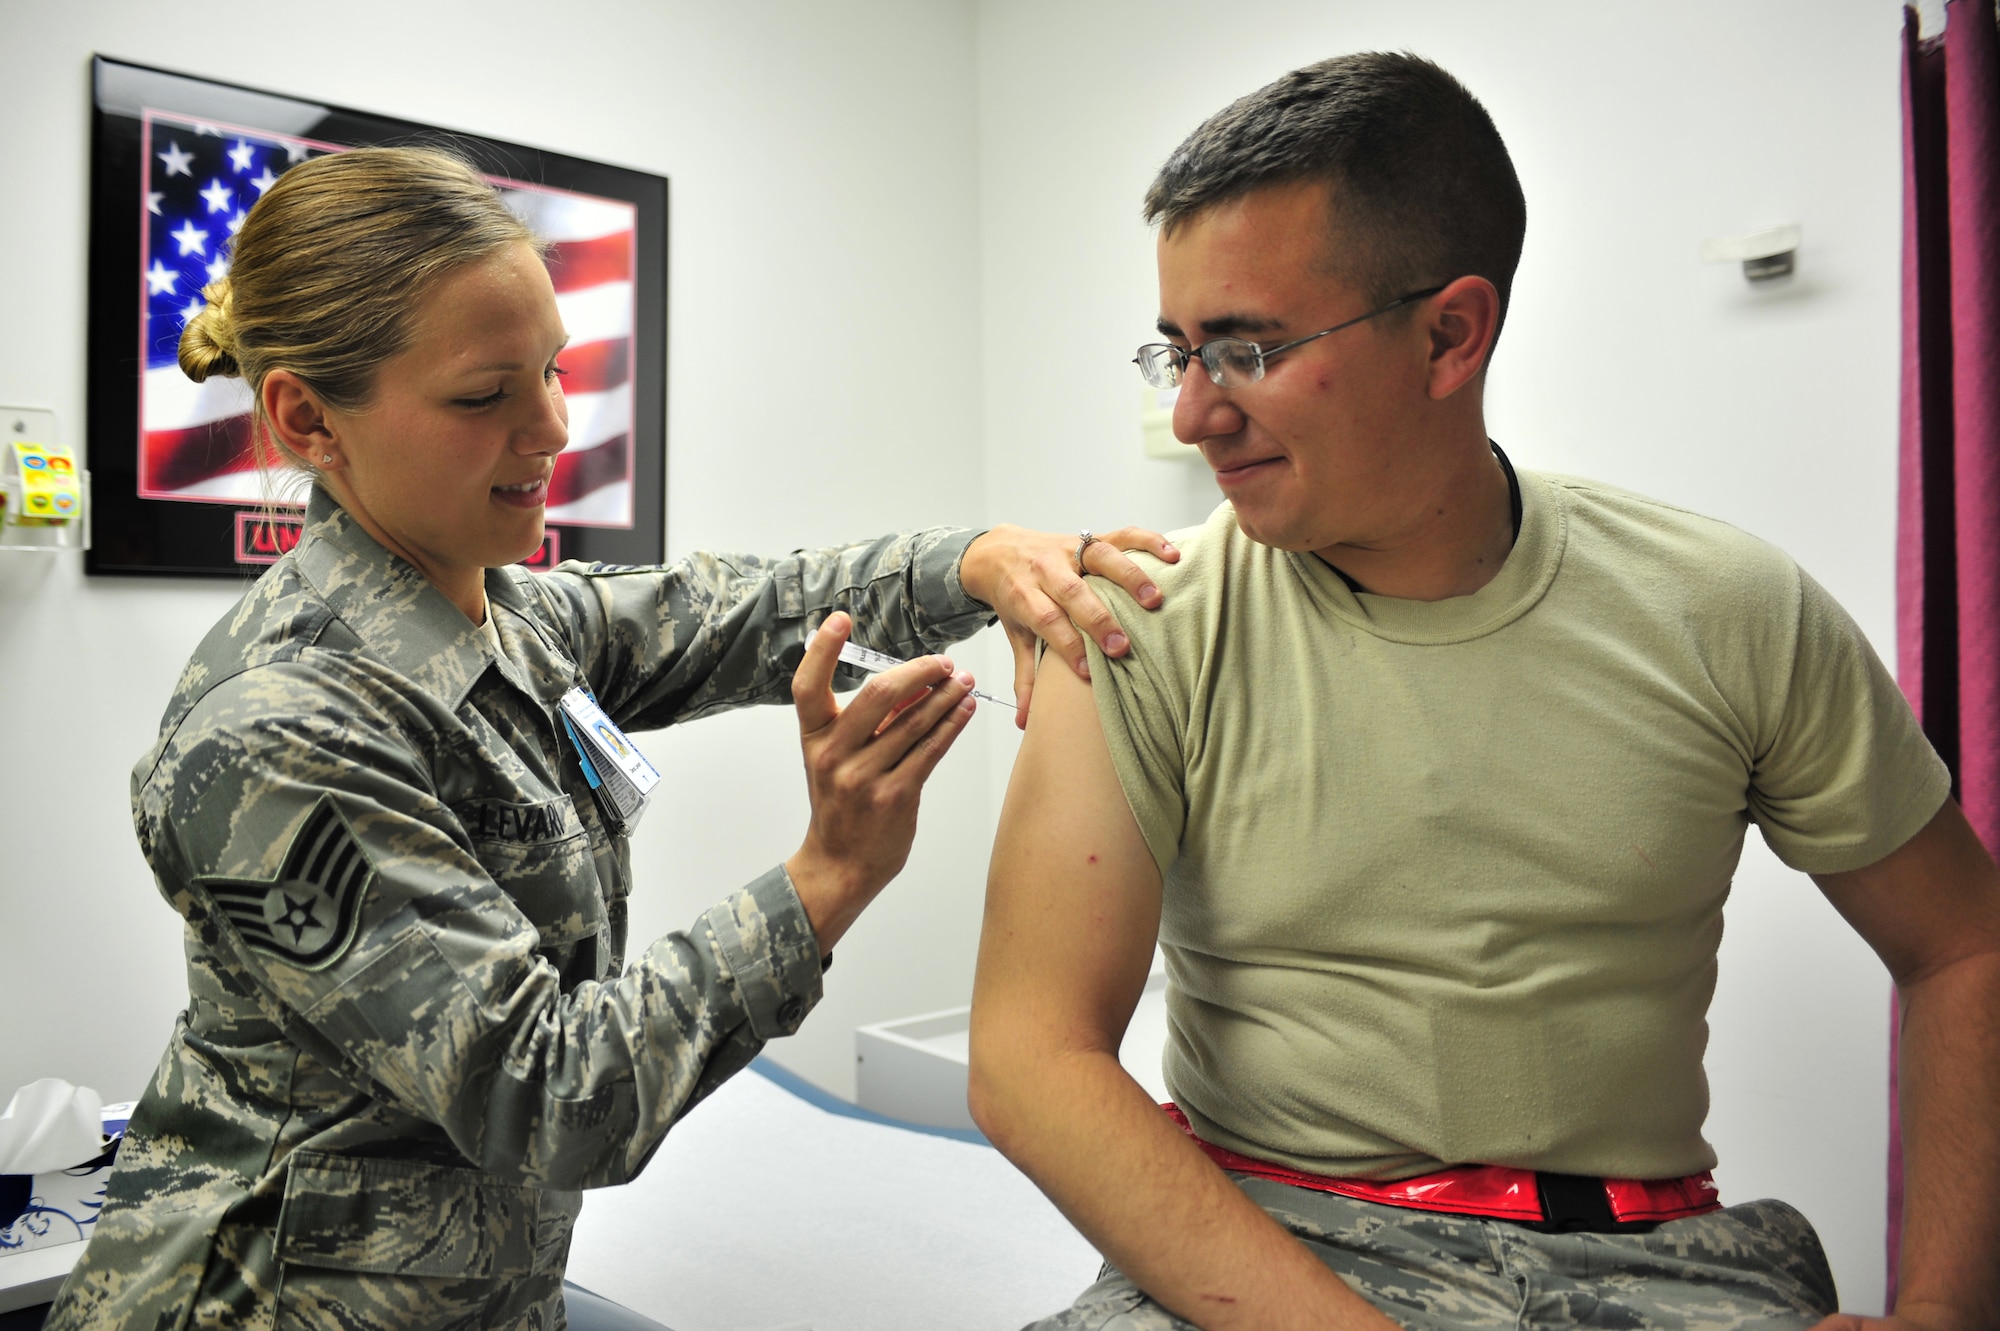 U.S. Air Force Staff Sgt. Dena Levari, 27th Special Operations Medical Operations Squadron NCOIC of immunizations, prepares to vaccinate 2nd Lt. Jose Valadez, 27th Special Operations Aircraft Maintenance Squadron, with Gardasil in the clinic at Cannon Air Force Base, N.M., May 29, 2012. The Gardasil vaccine protects against four types of the Human Papillomavirus and has recently been cleared for use on males. (U.S. Air Force photo by Airman 1st Class Alexxis Pons Abascal)  